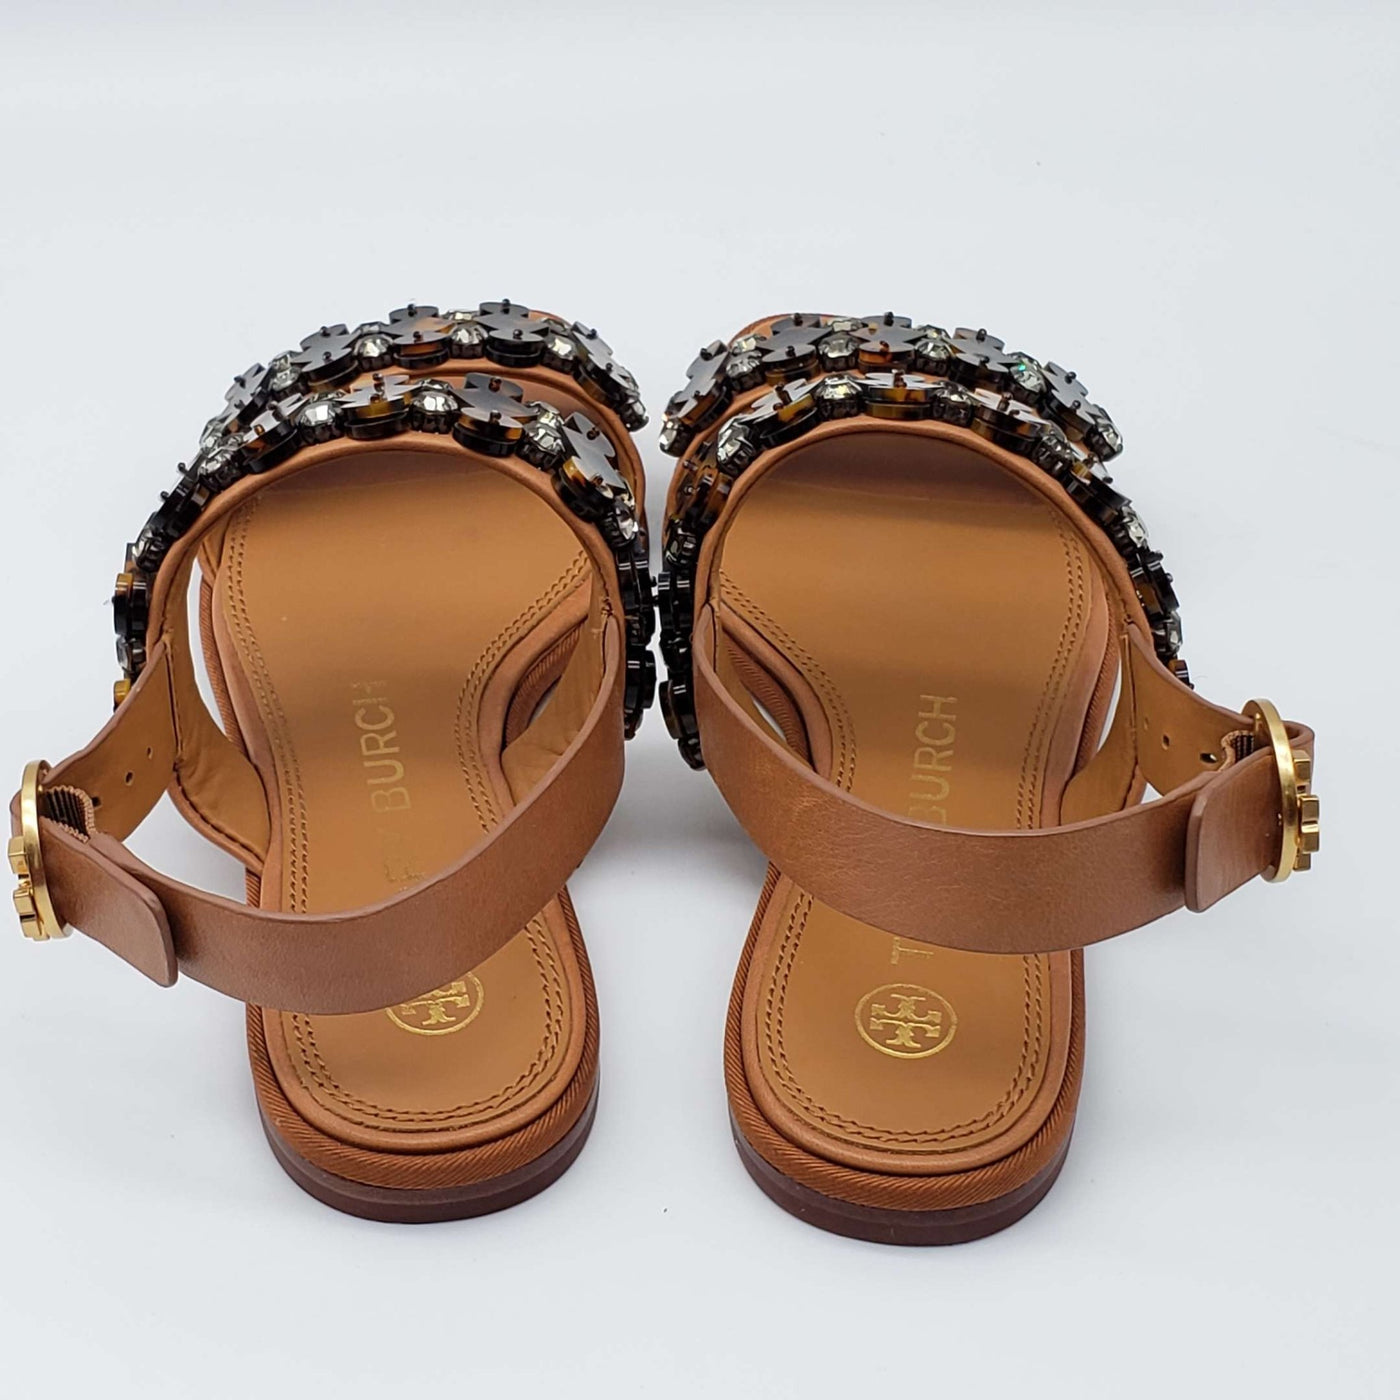 Tory Burch Brown Leather Sandal - Luxury Cheaper